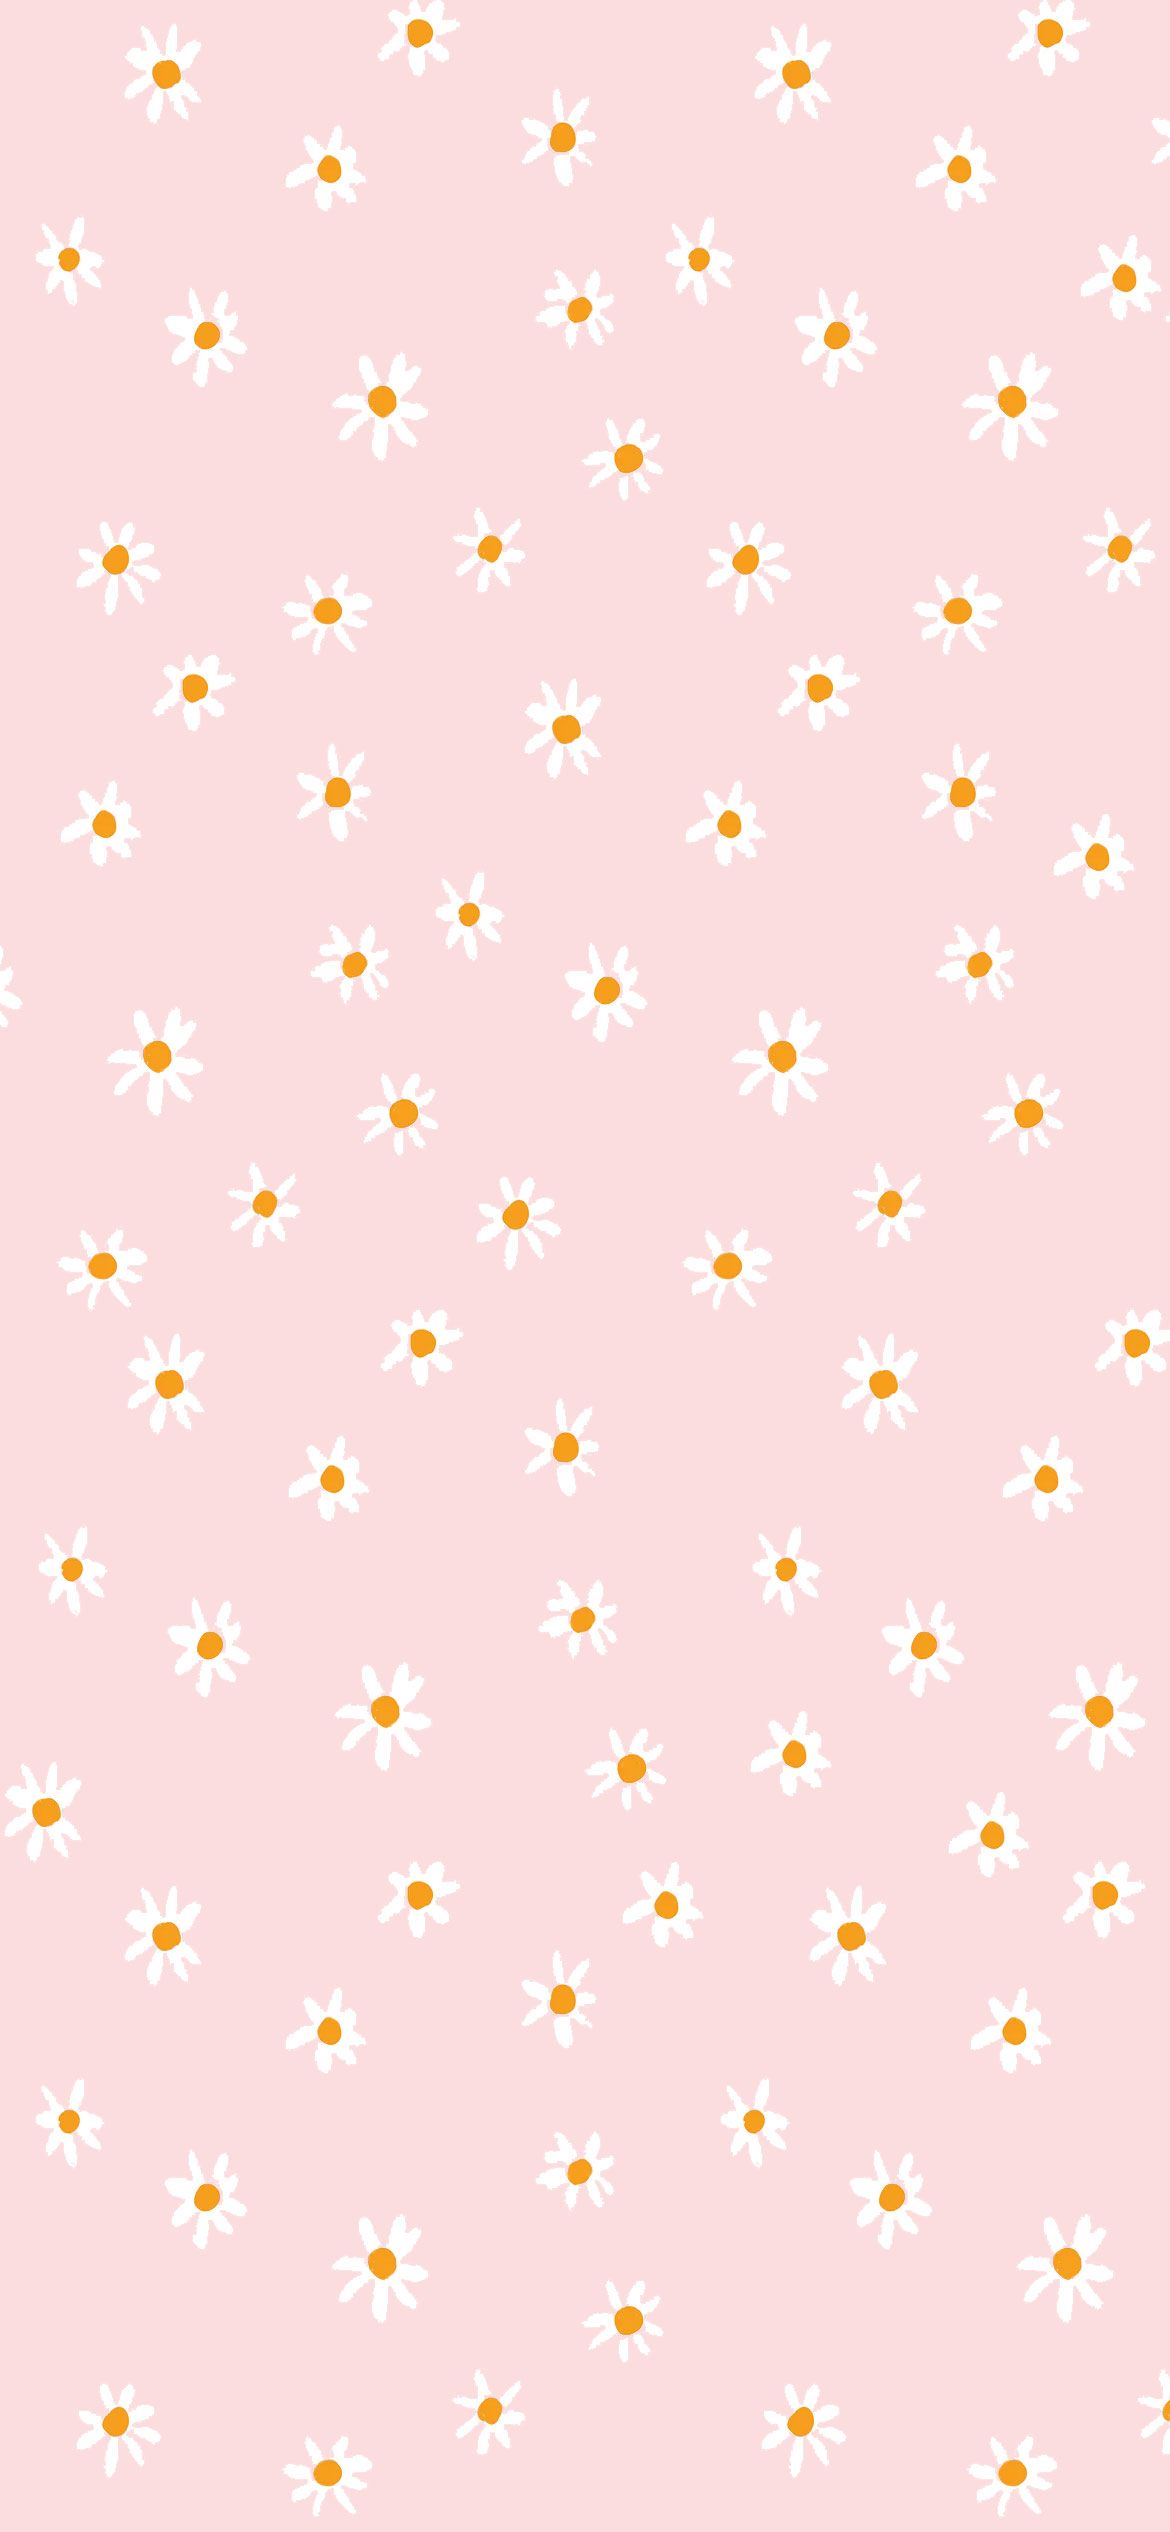 IPhone wallpaper with daisies on a pink background - Pink, boho